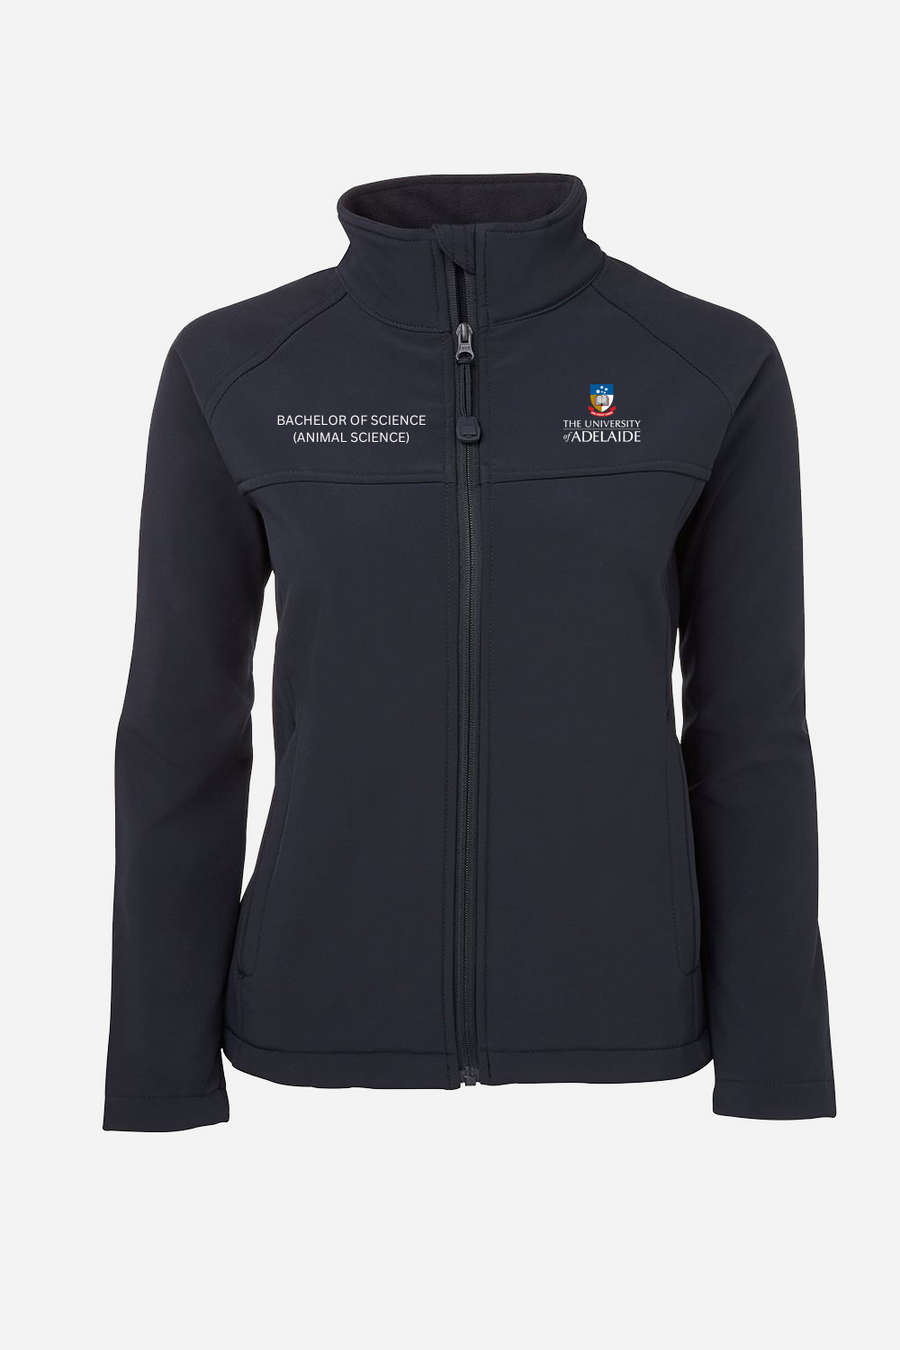 Bachelor of Science (Animal Science) Soft Shell Jacket Women's